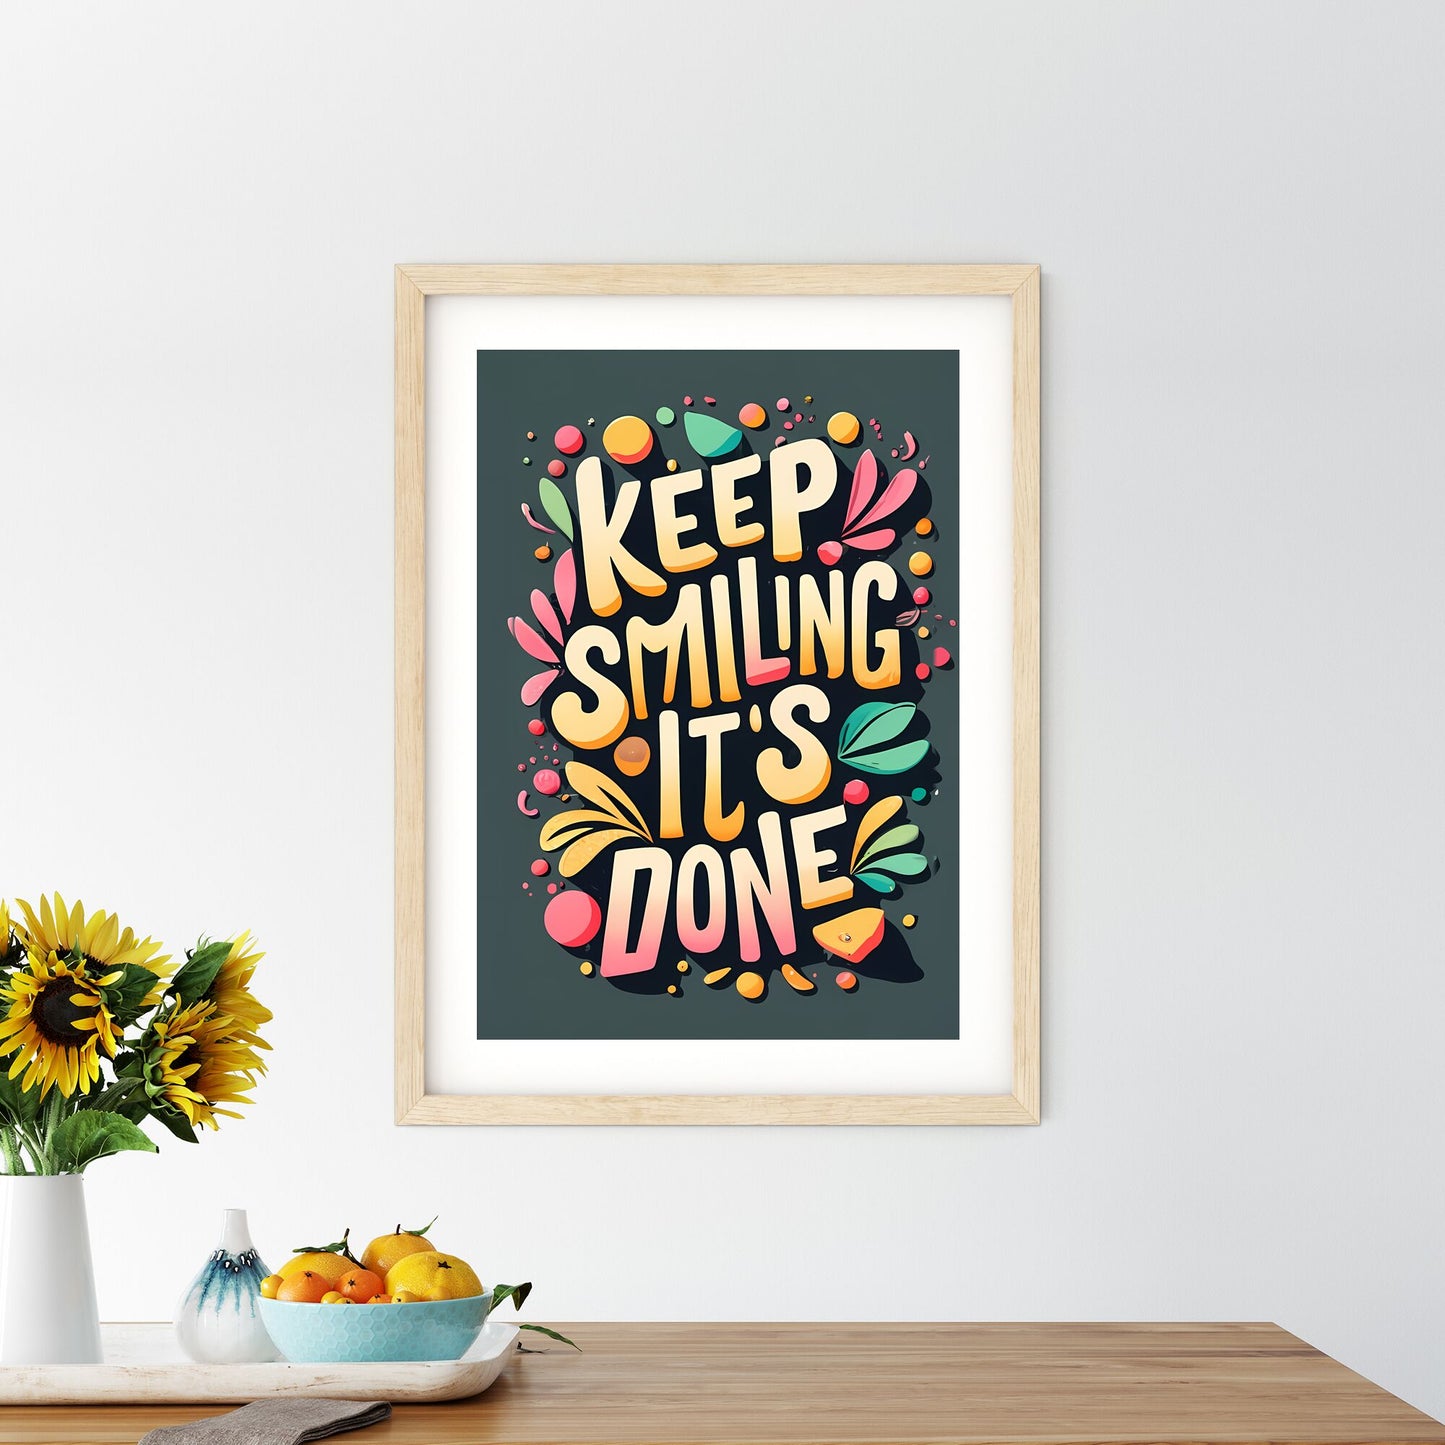 Keep Smiling, Its Done - A Colorful Text On A Black Background Art Print Default Title